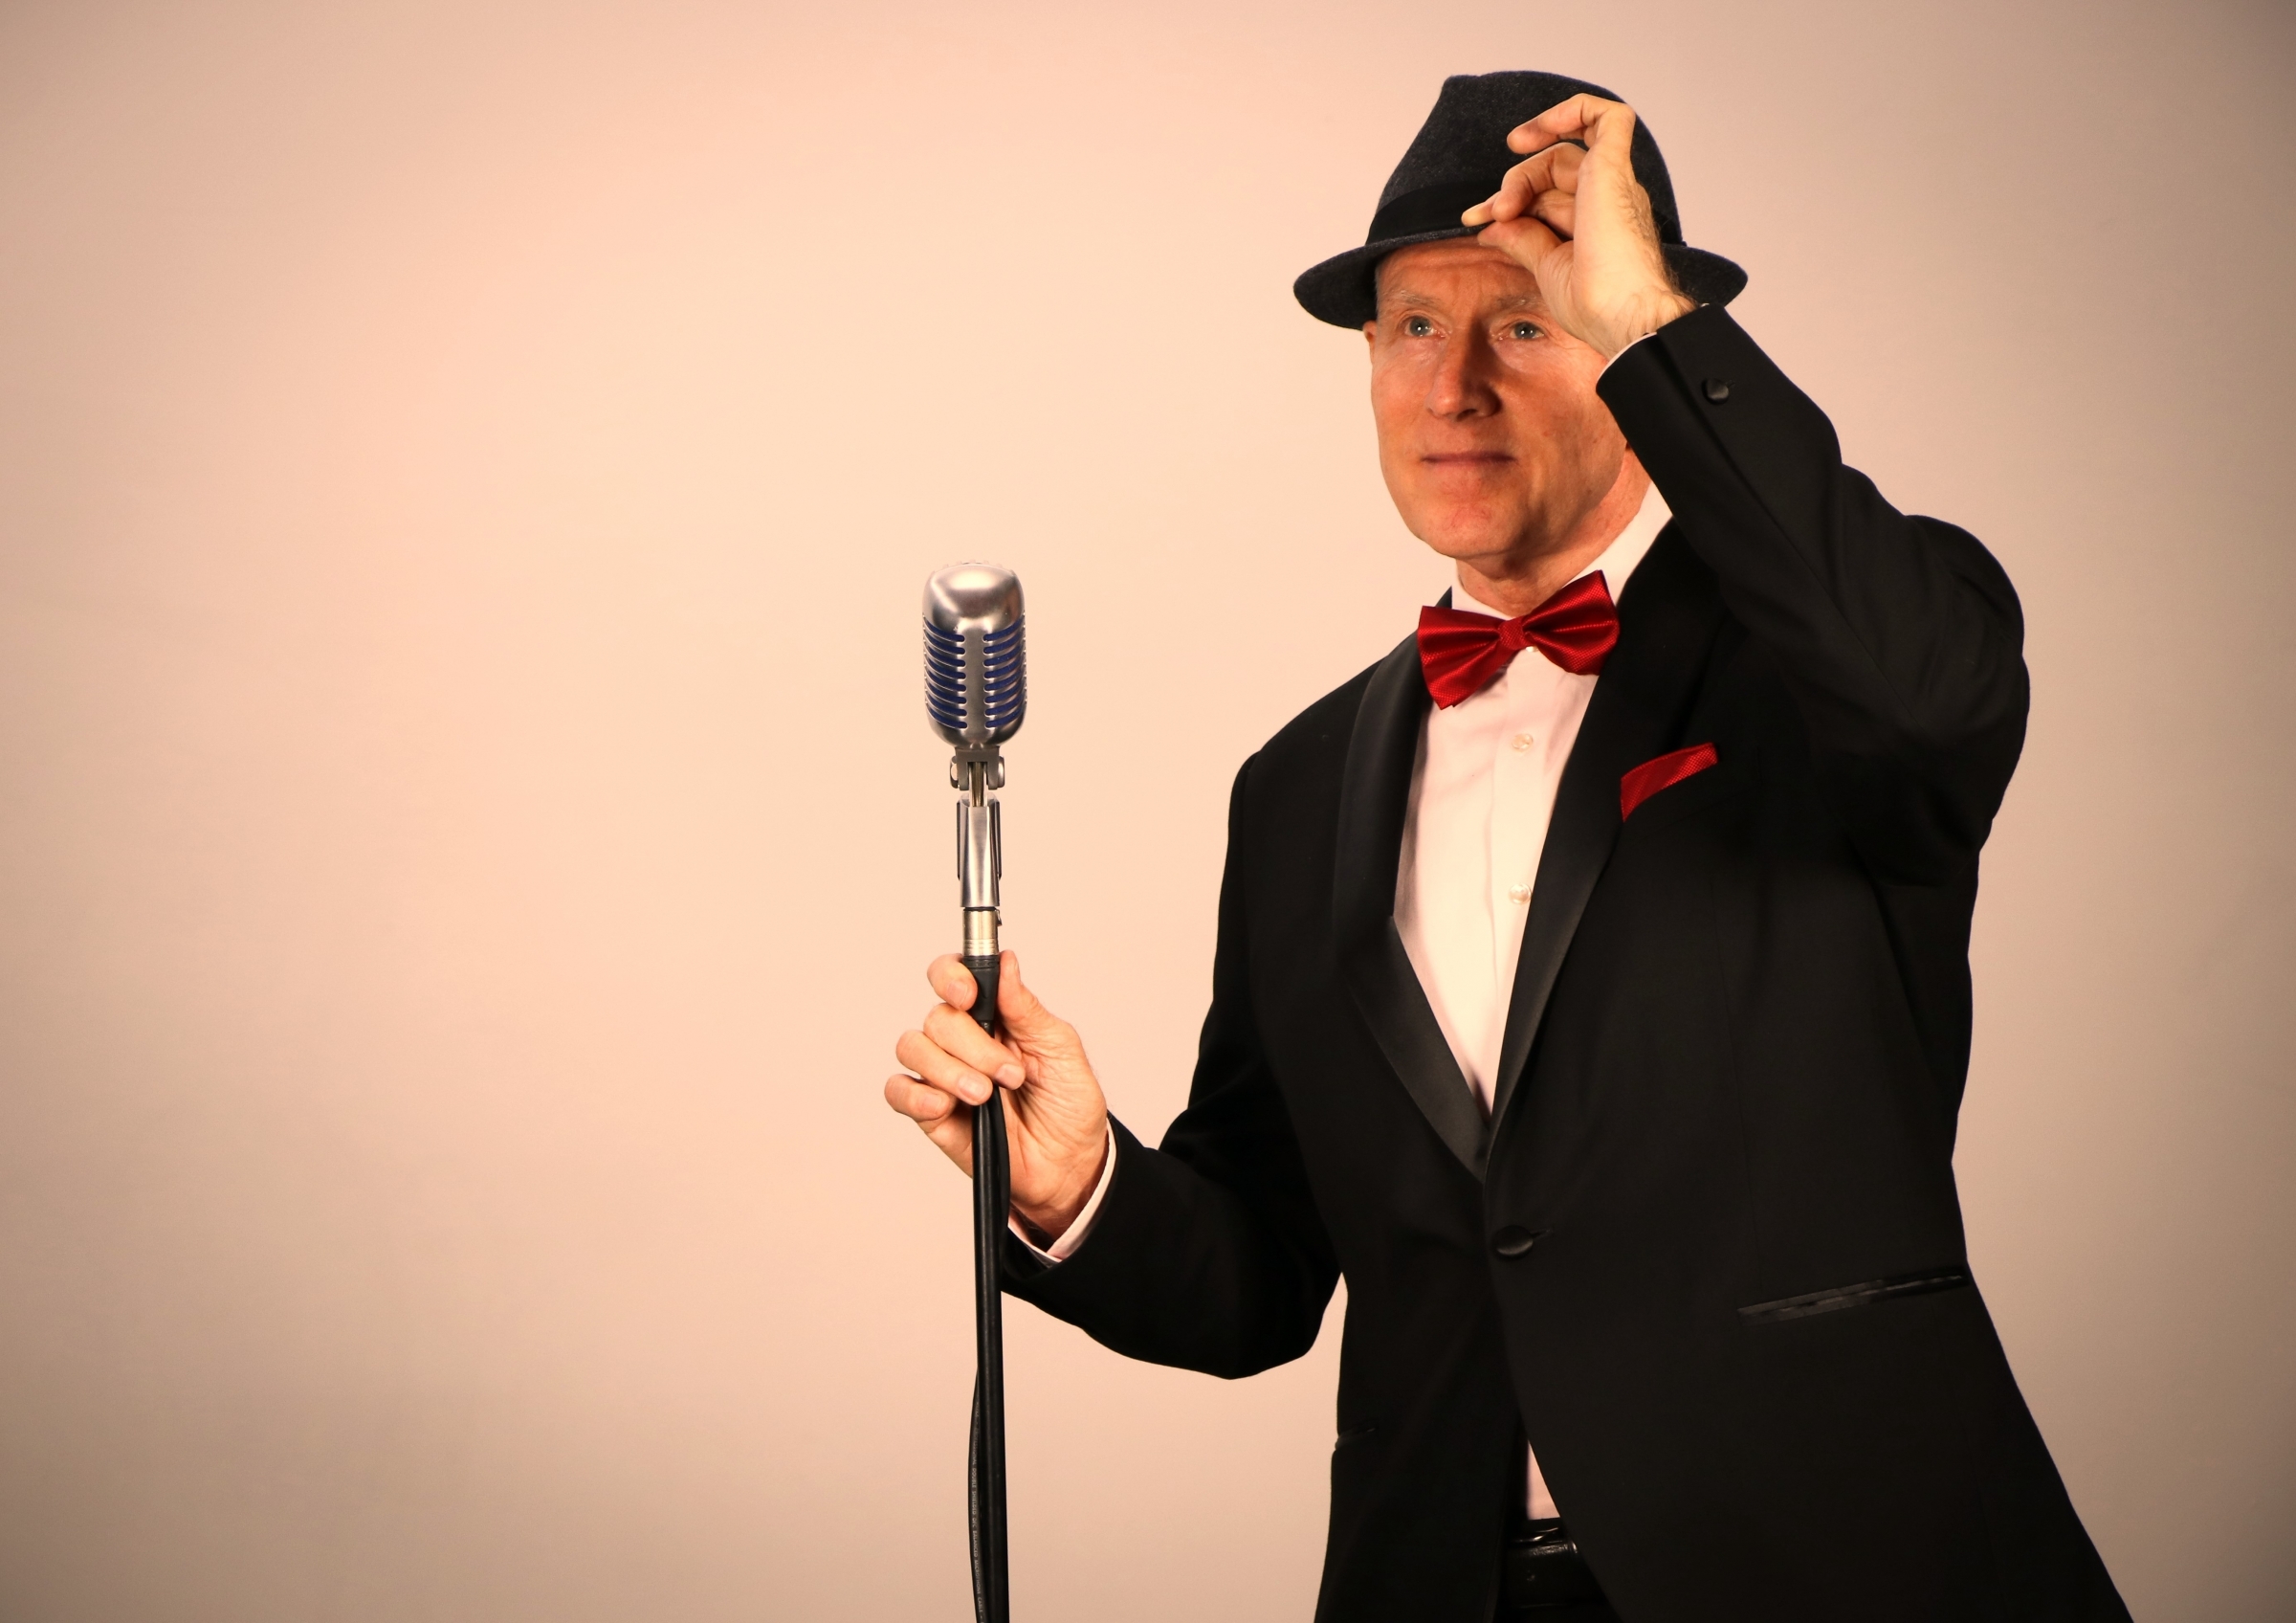 Swing singer for weddings and events in the UK